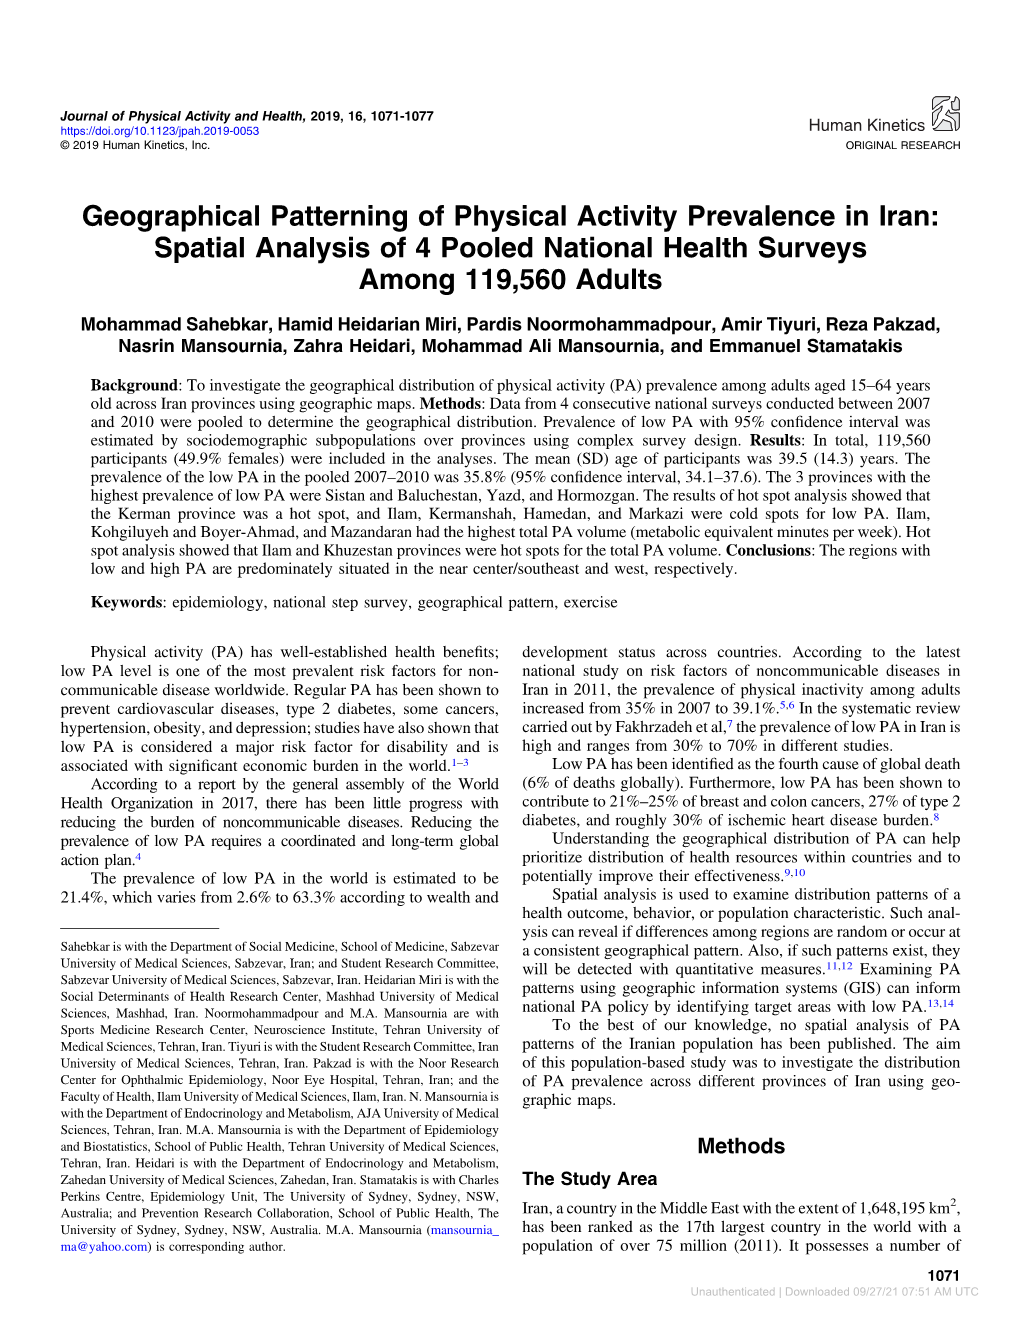 Geographical Patterning of Physical Activity Prevalence in Iran: Spatial Analysis of 4 Pooled National Health Surveys Among 119,560 Adults